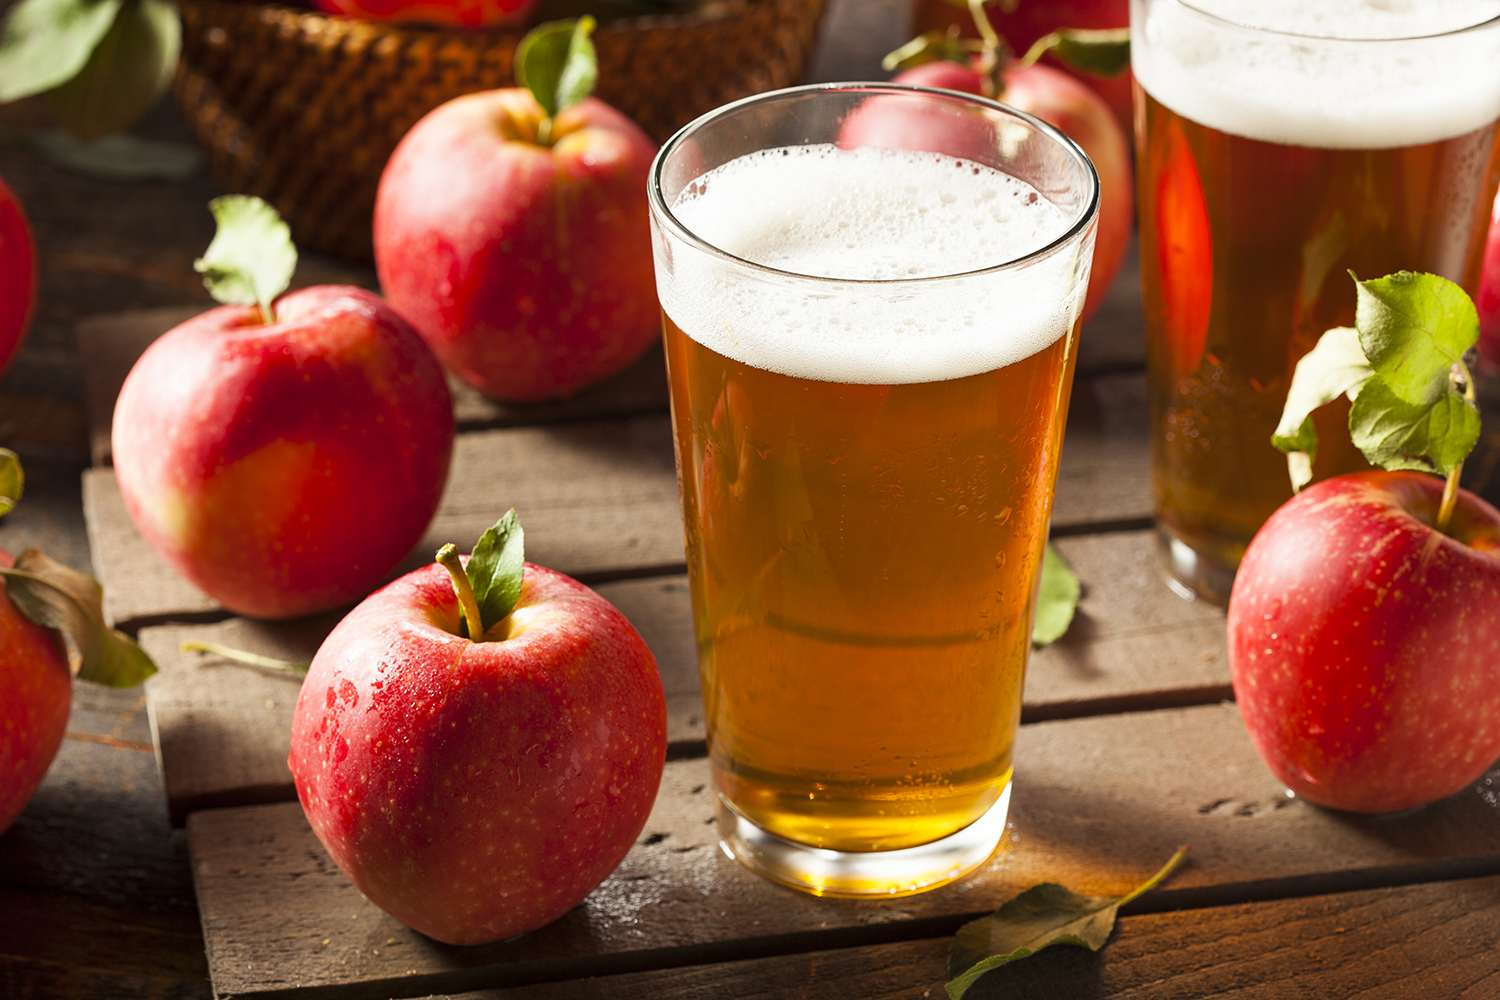  How To Make Hard Apple Cider: The Lazy Mans Guide